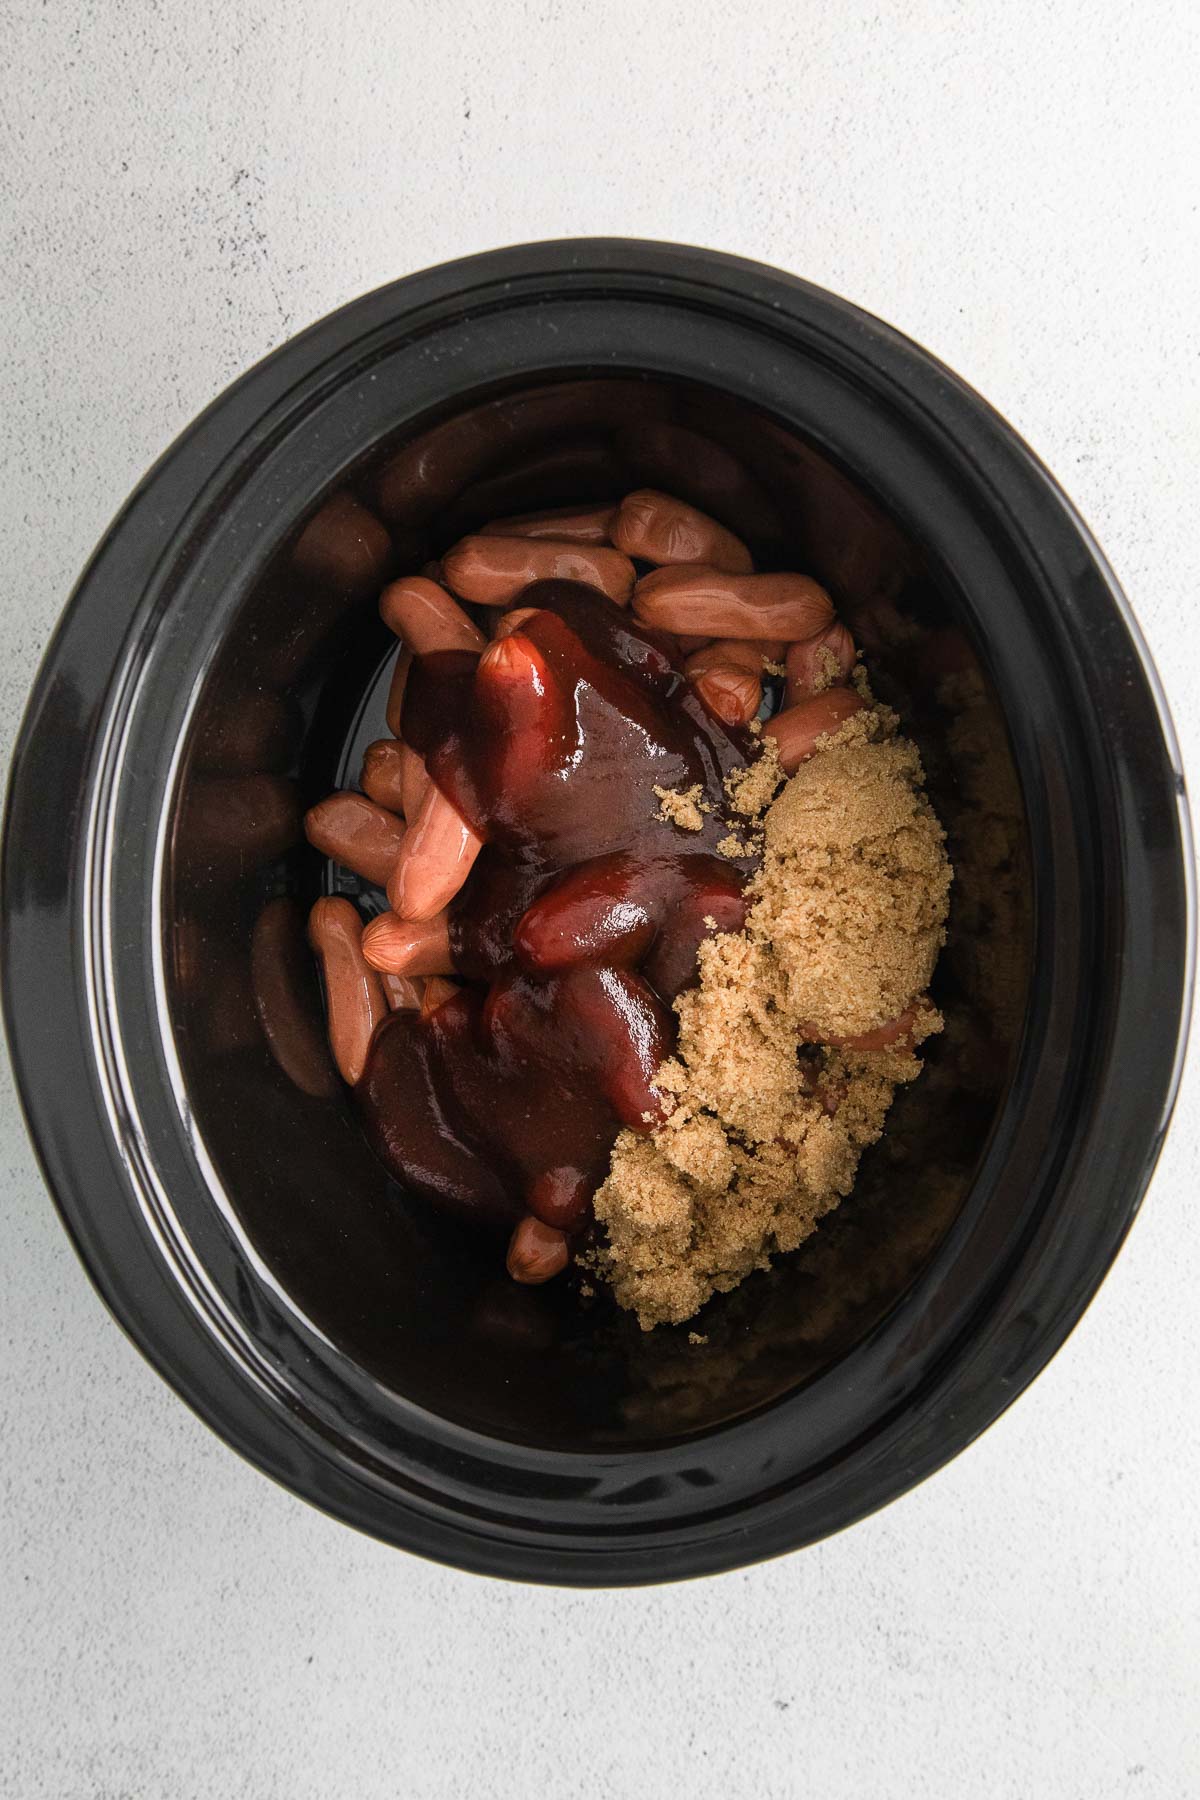 black crock pot with little weenies, brown sugar and barbecue sauce